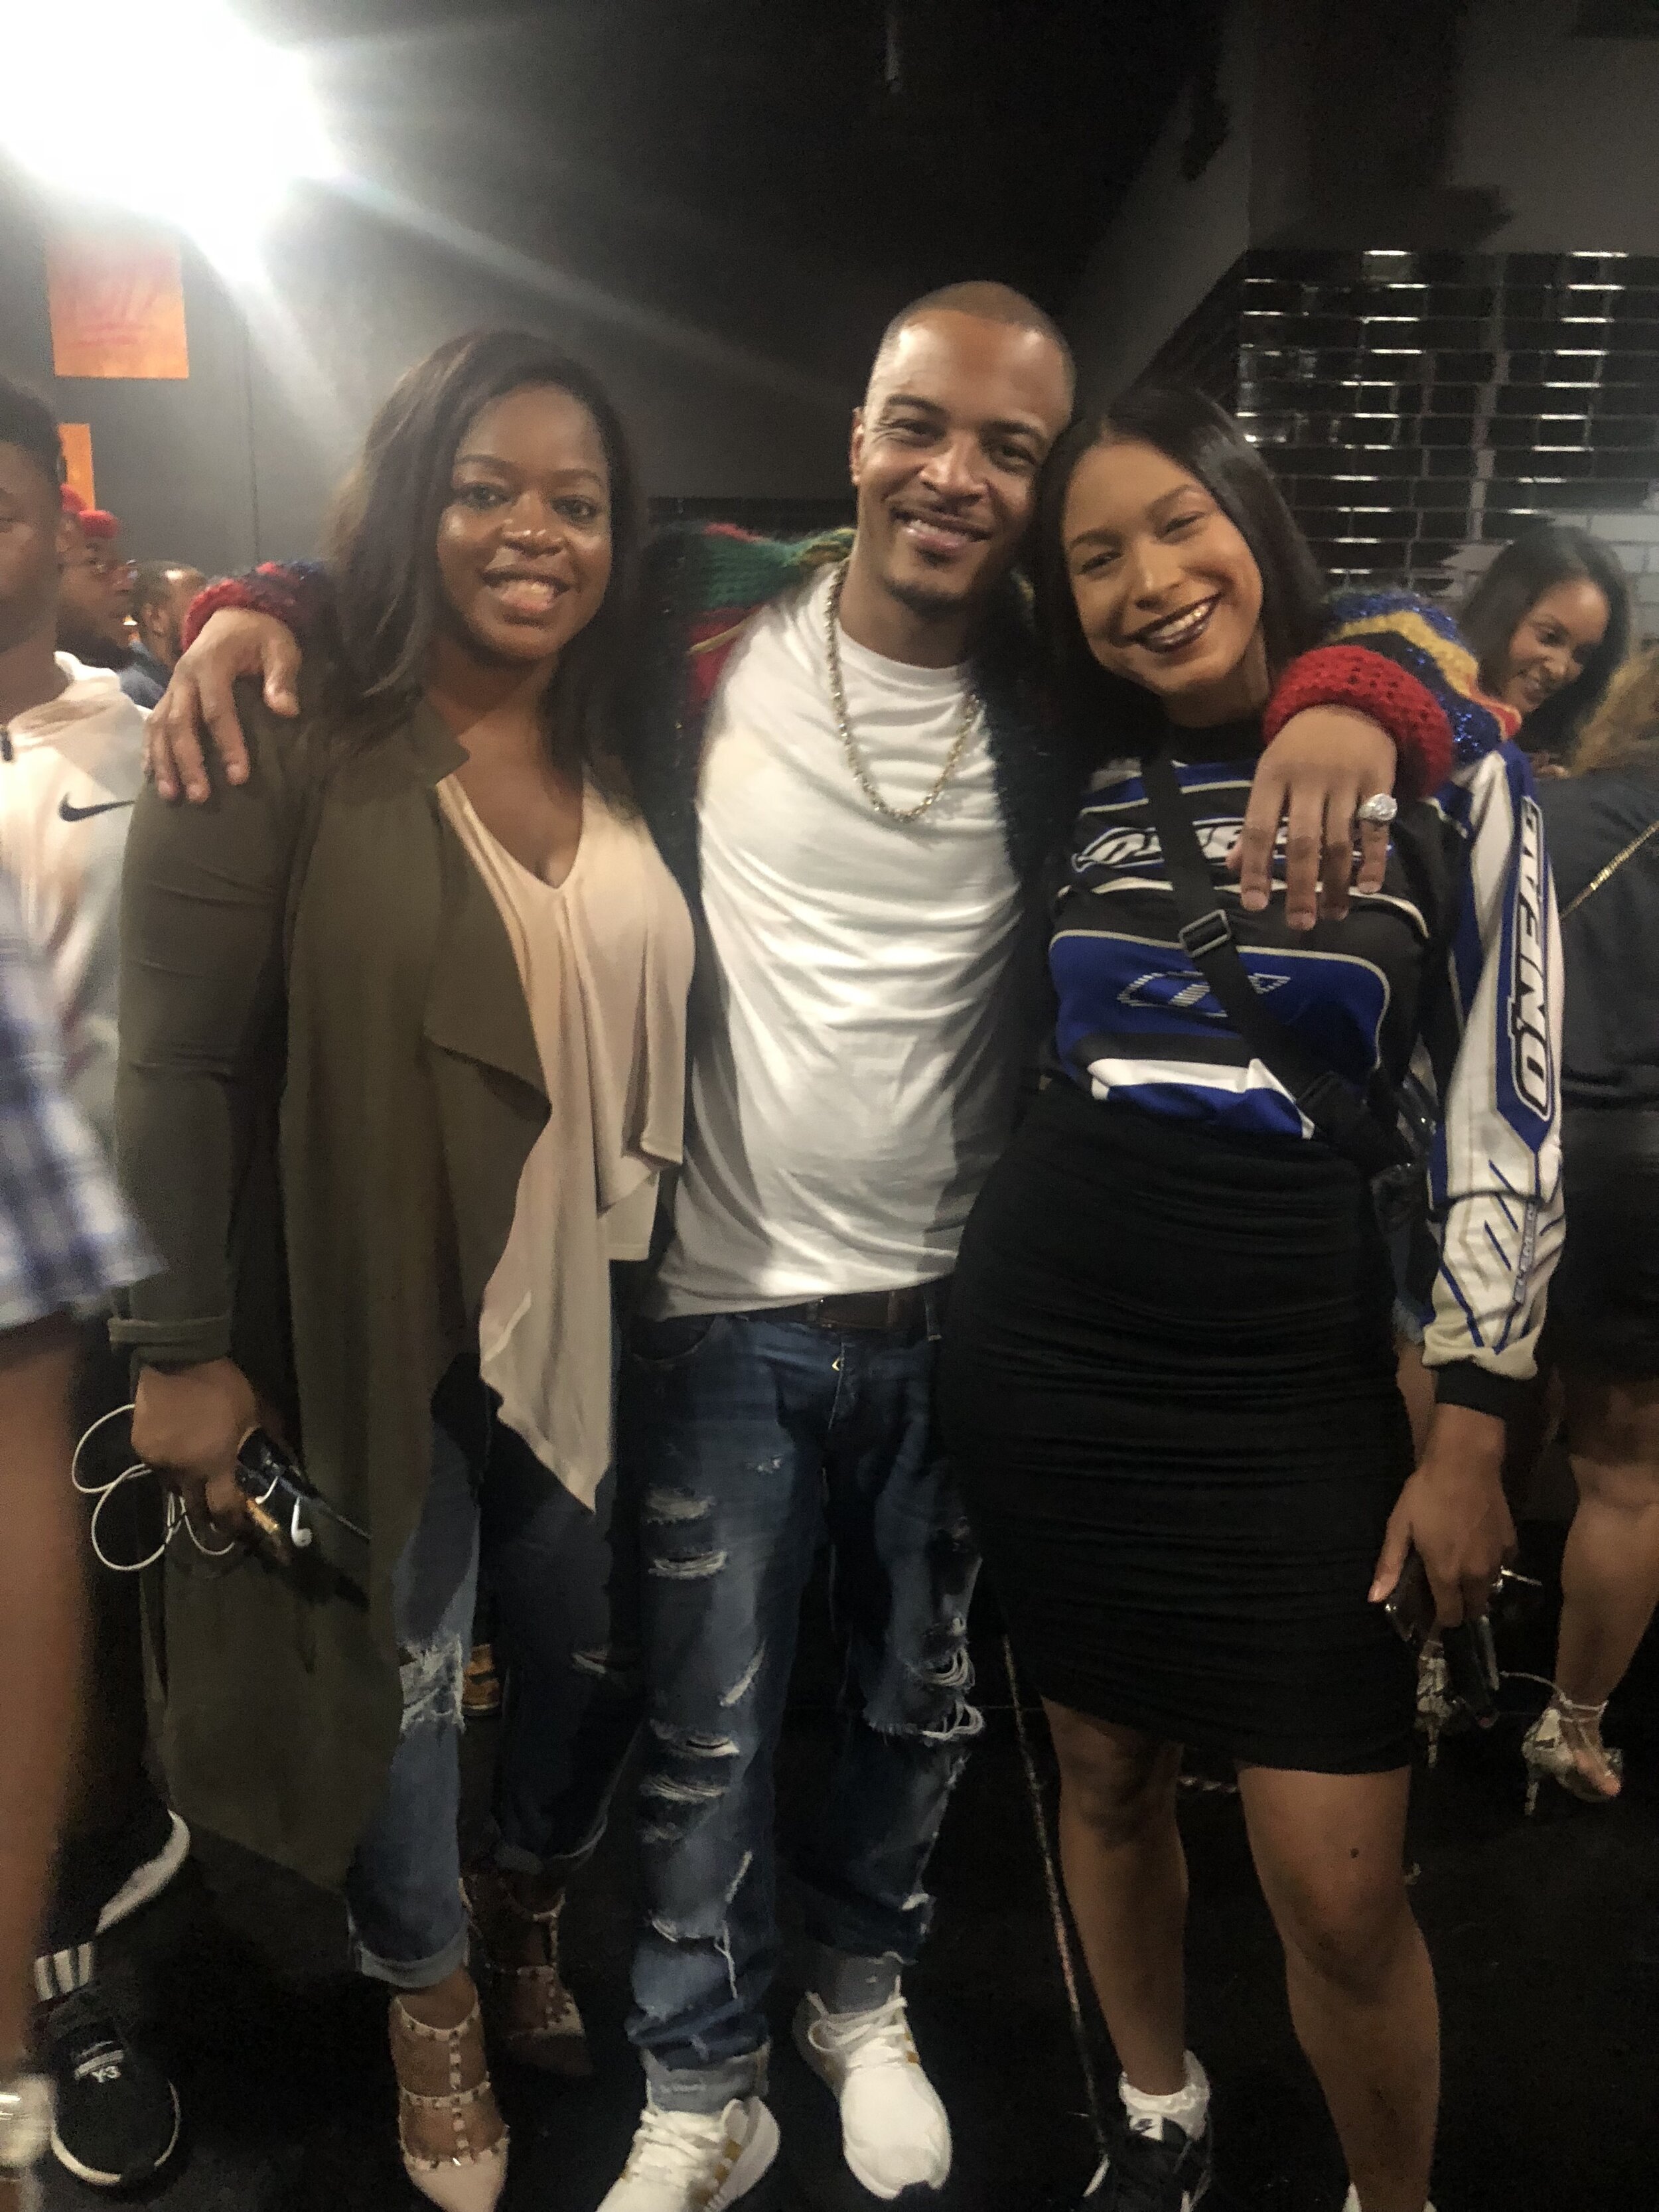 Skye, Tip and a friend at the Trap Music Museum opening